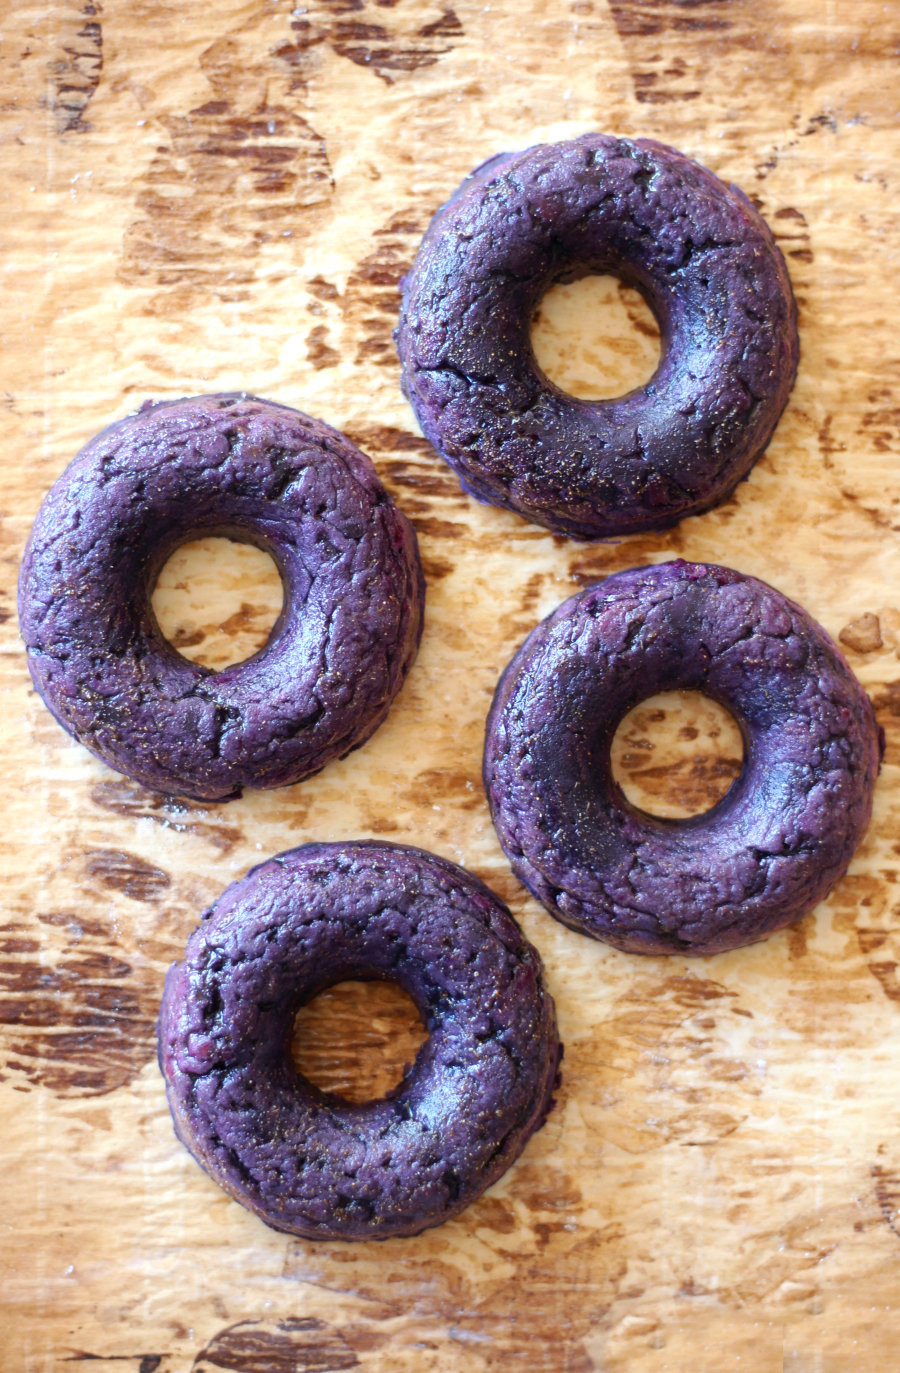 Ginger Glazed Purple Sweet Potato Doughnuts (Gluten-Free, Allergy-Free, Vegan, Paleo) | Strength and Sunshine @RebeccaGF666 No more beige donuts! These healthy Ginger Glazed Purple Sweet Potato Doughnuts are gluten-free, allergy-free, vegan, and paleo! A creative and fun recipe to try for breakfast, dessert, or an afternoon snack! 